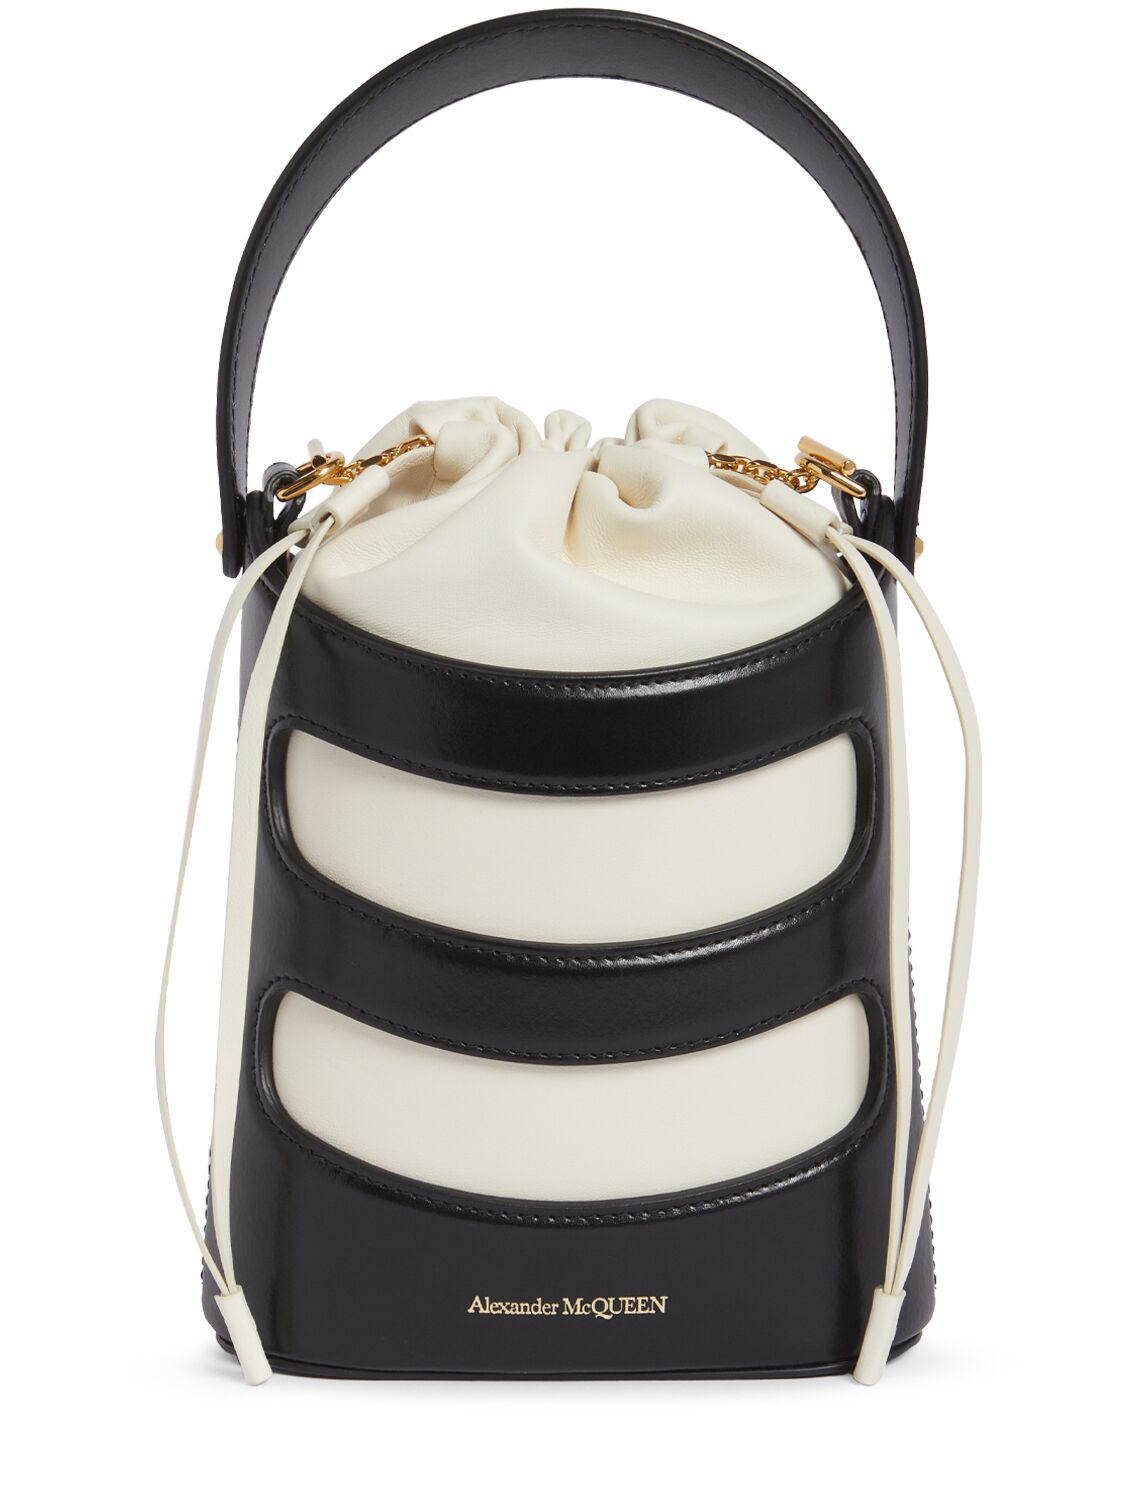 Alexander Mcqueen The Mini Rise Leather Top Handle Bag In Black/ivory